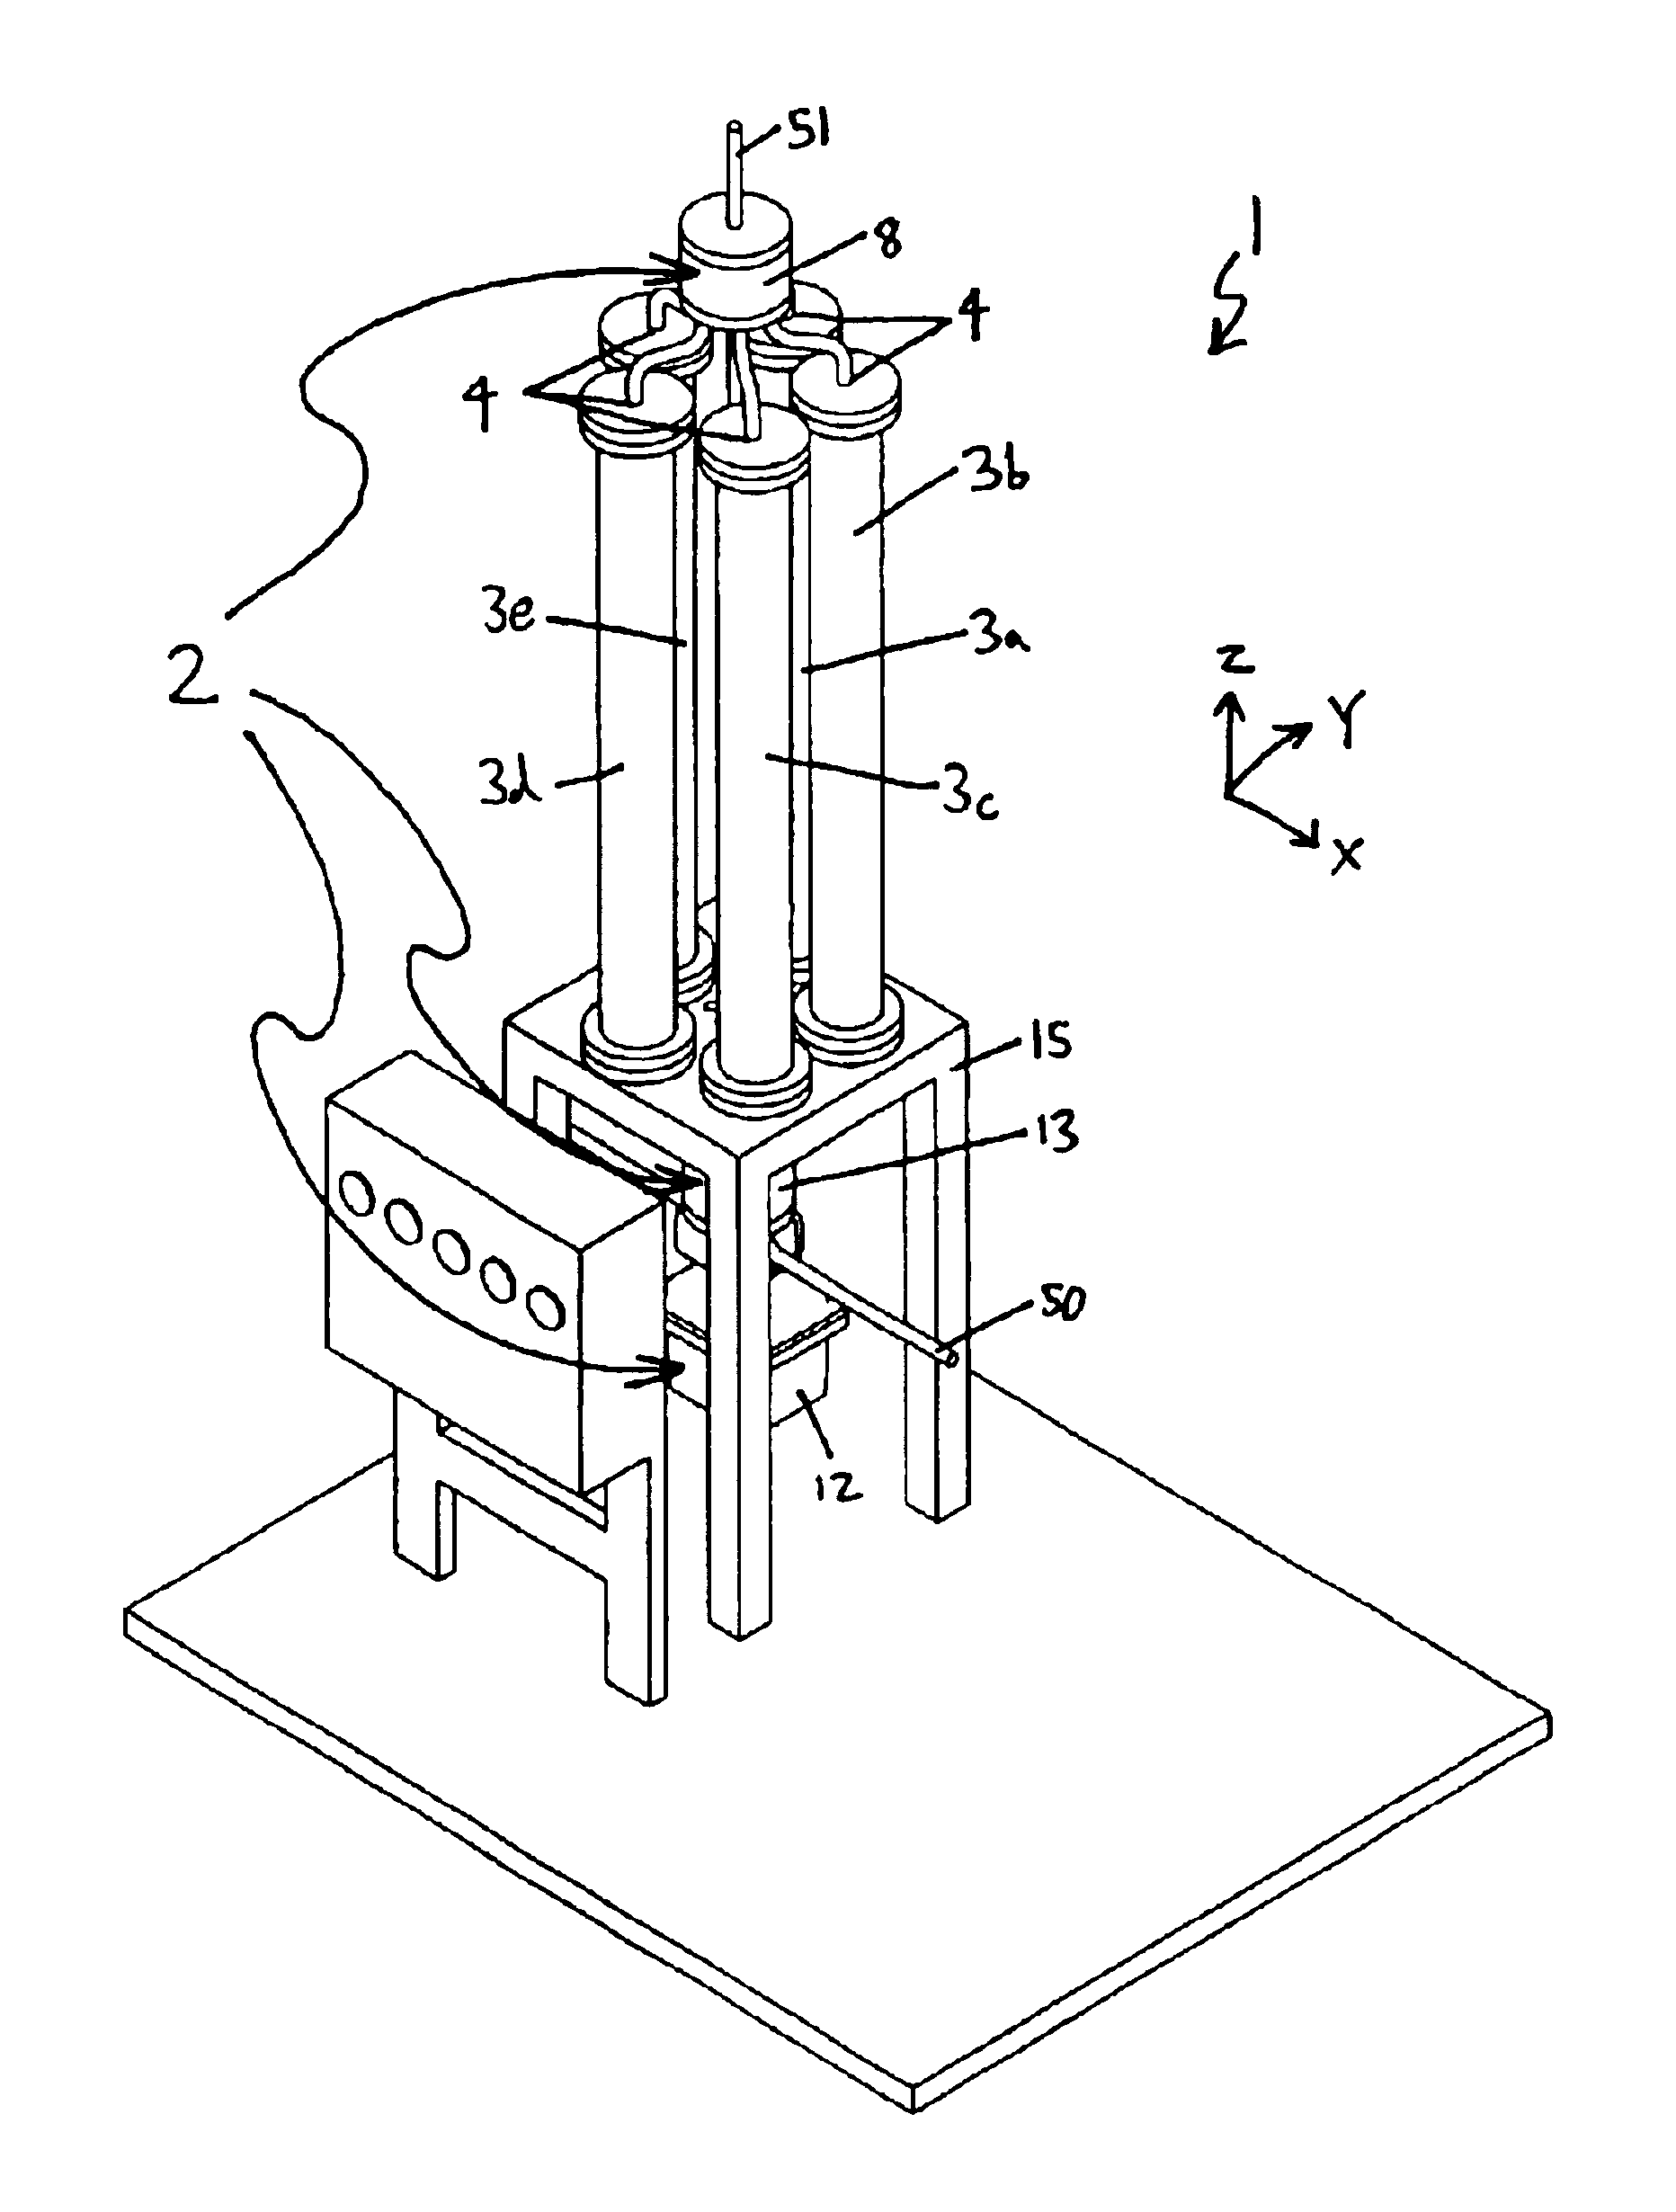 System and method for treating fluid using a multi-port valve assembly